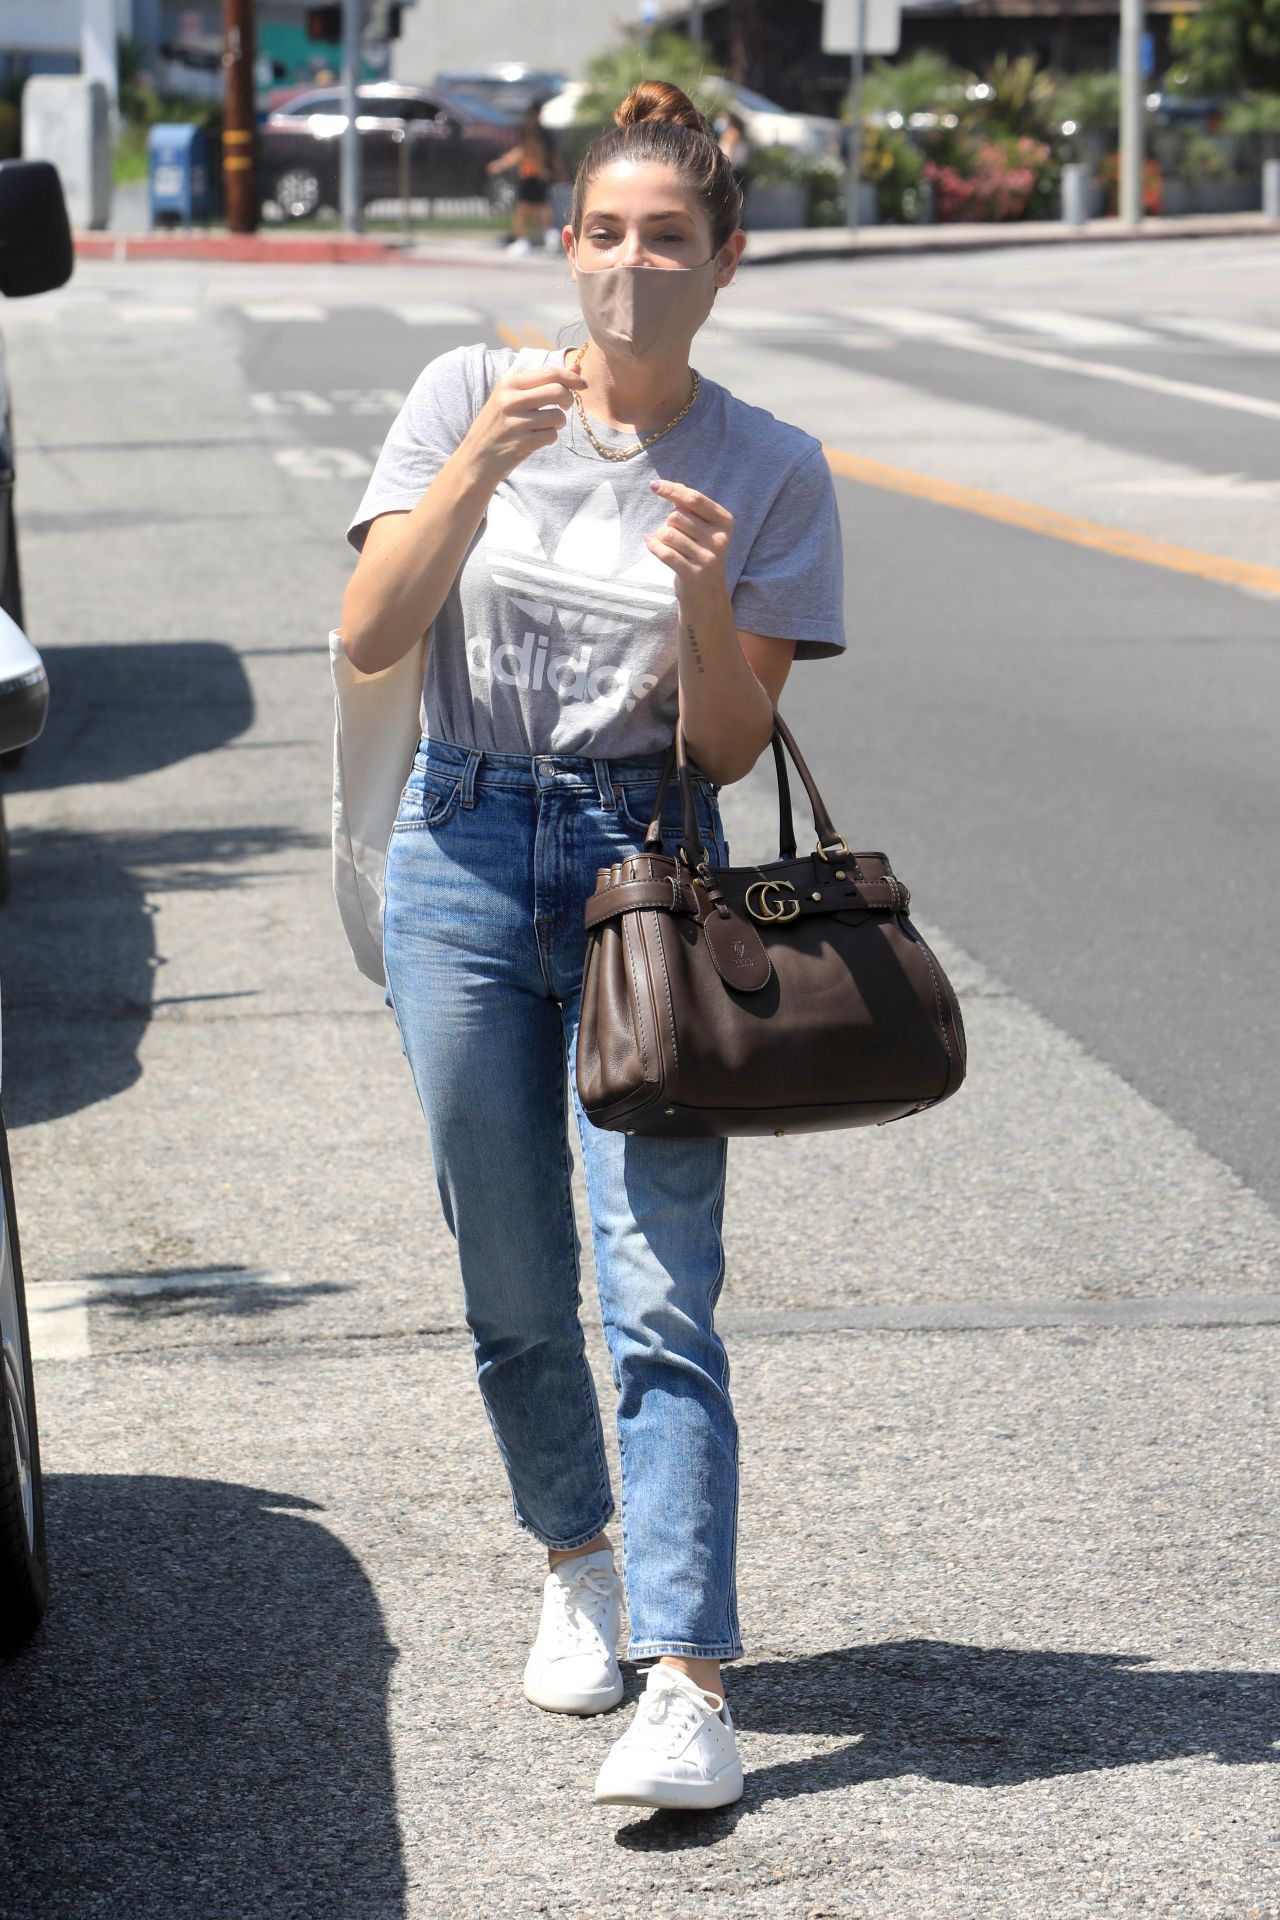 ashley-greene-in-casual-outfit-west-hollywood-08-05-2020-6.jpg